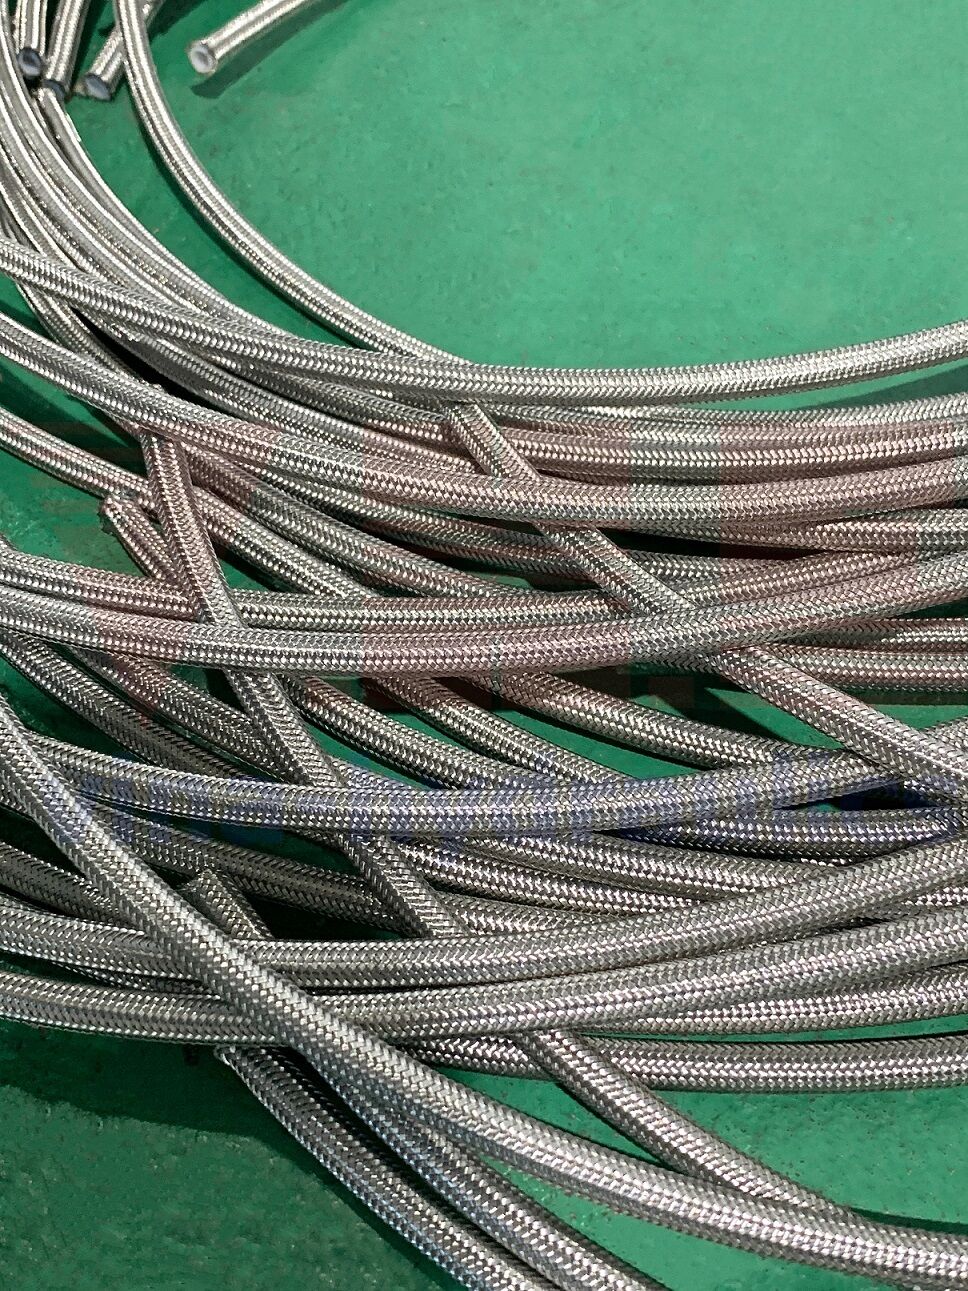 14'' stainless steel coated teflon hydraulic hose, PTFE-SS-04